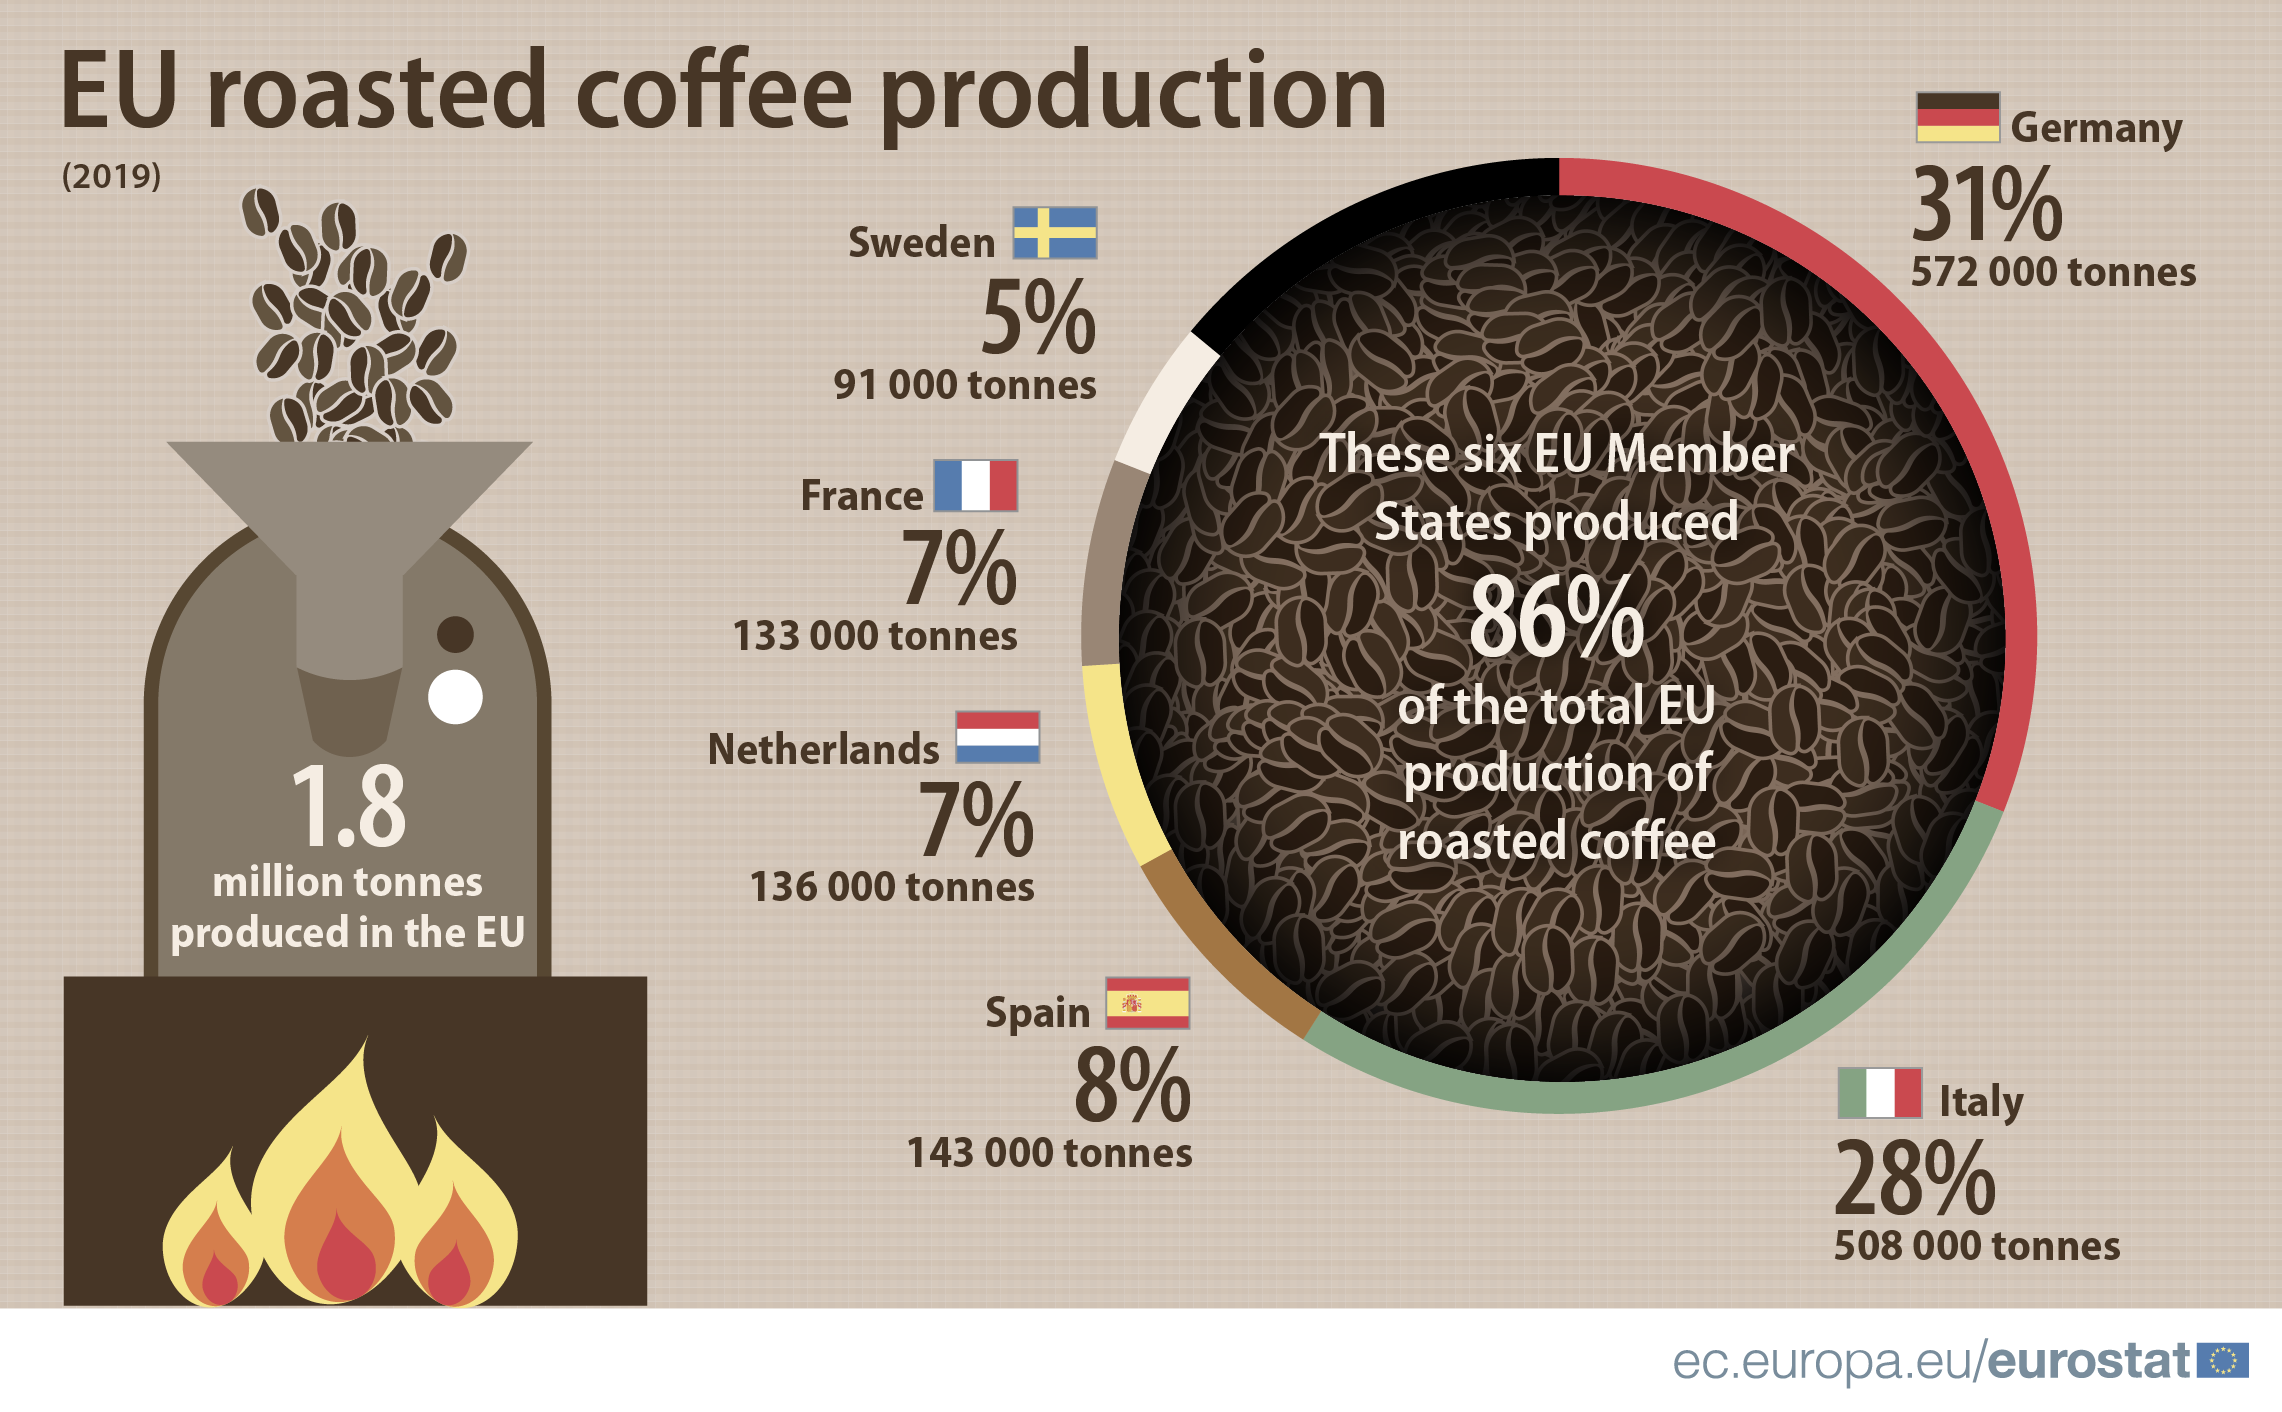 INfographic: Production of roasted coffee in the EU